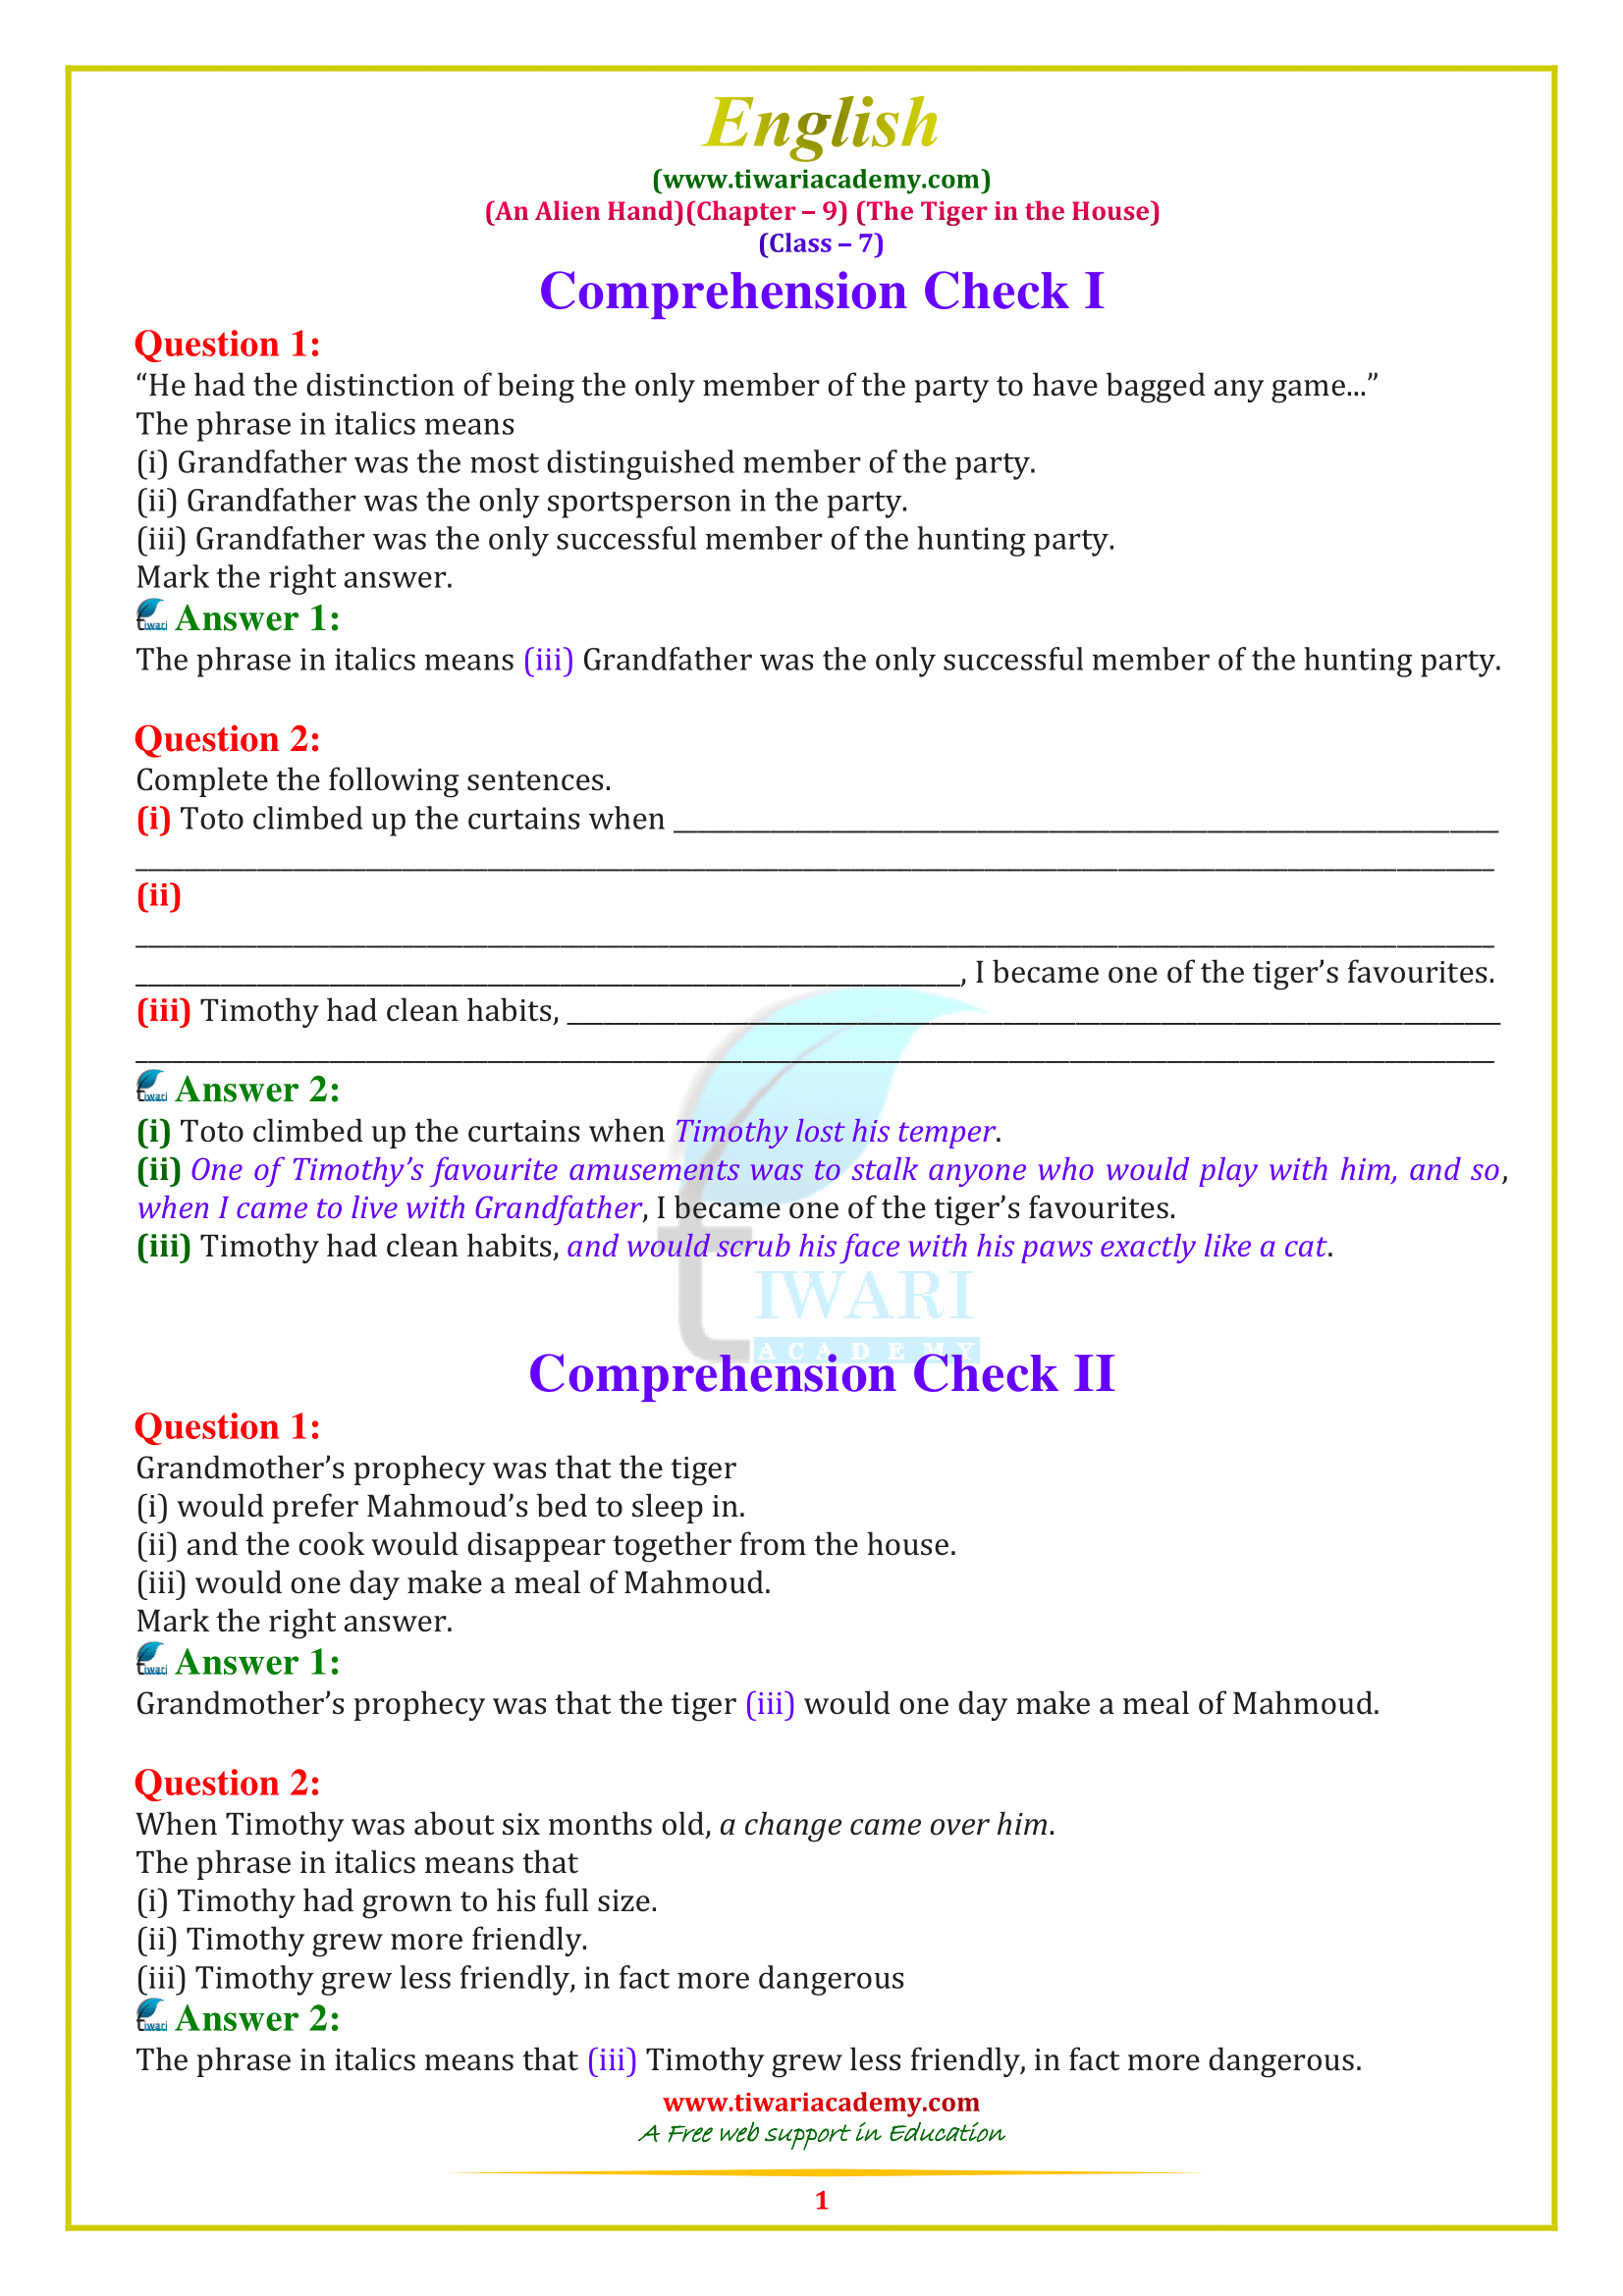 Class 7 English Chapter 9: A Tiger in the House - Answers